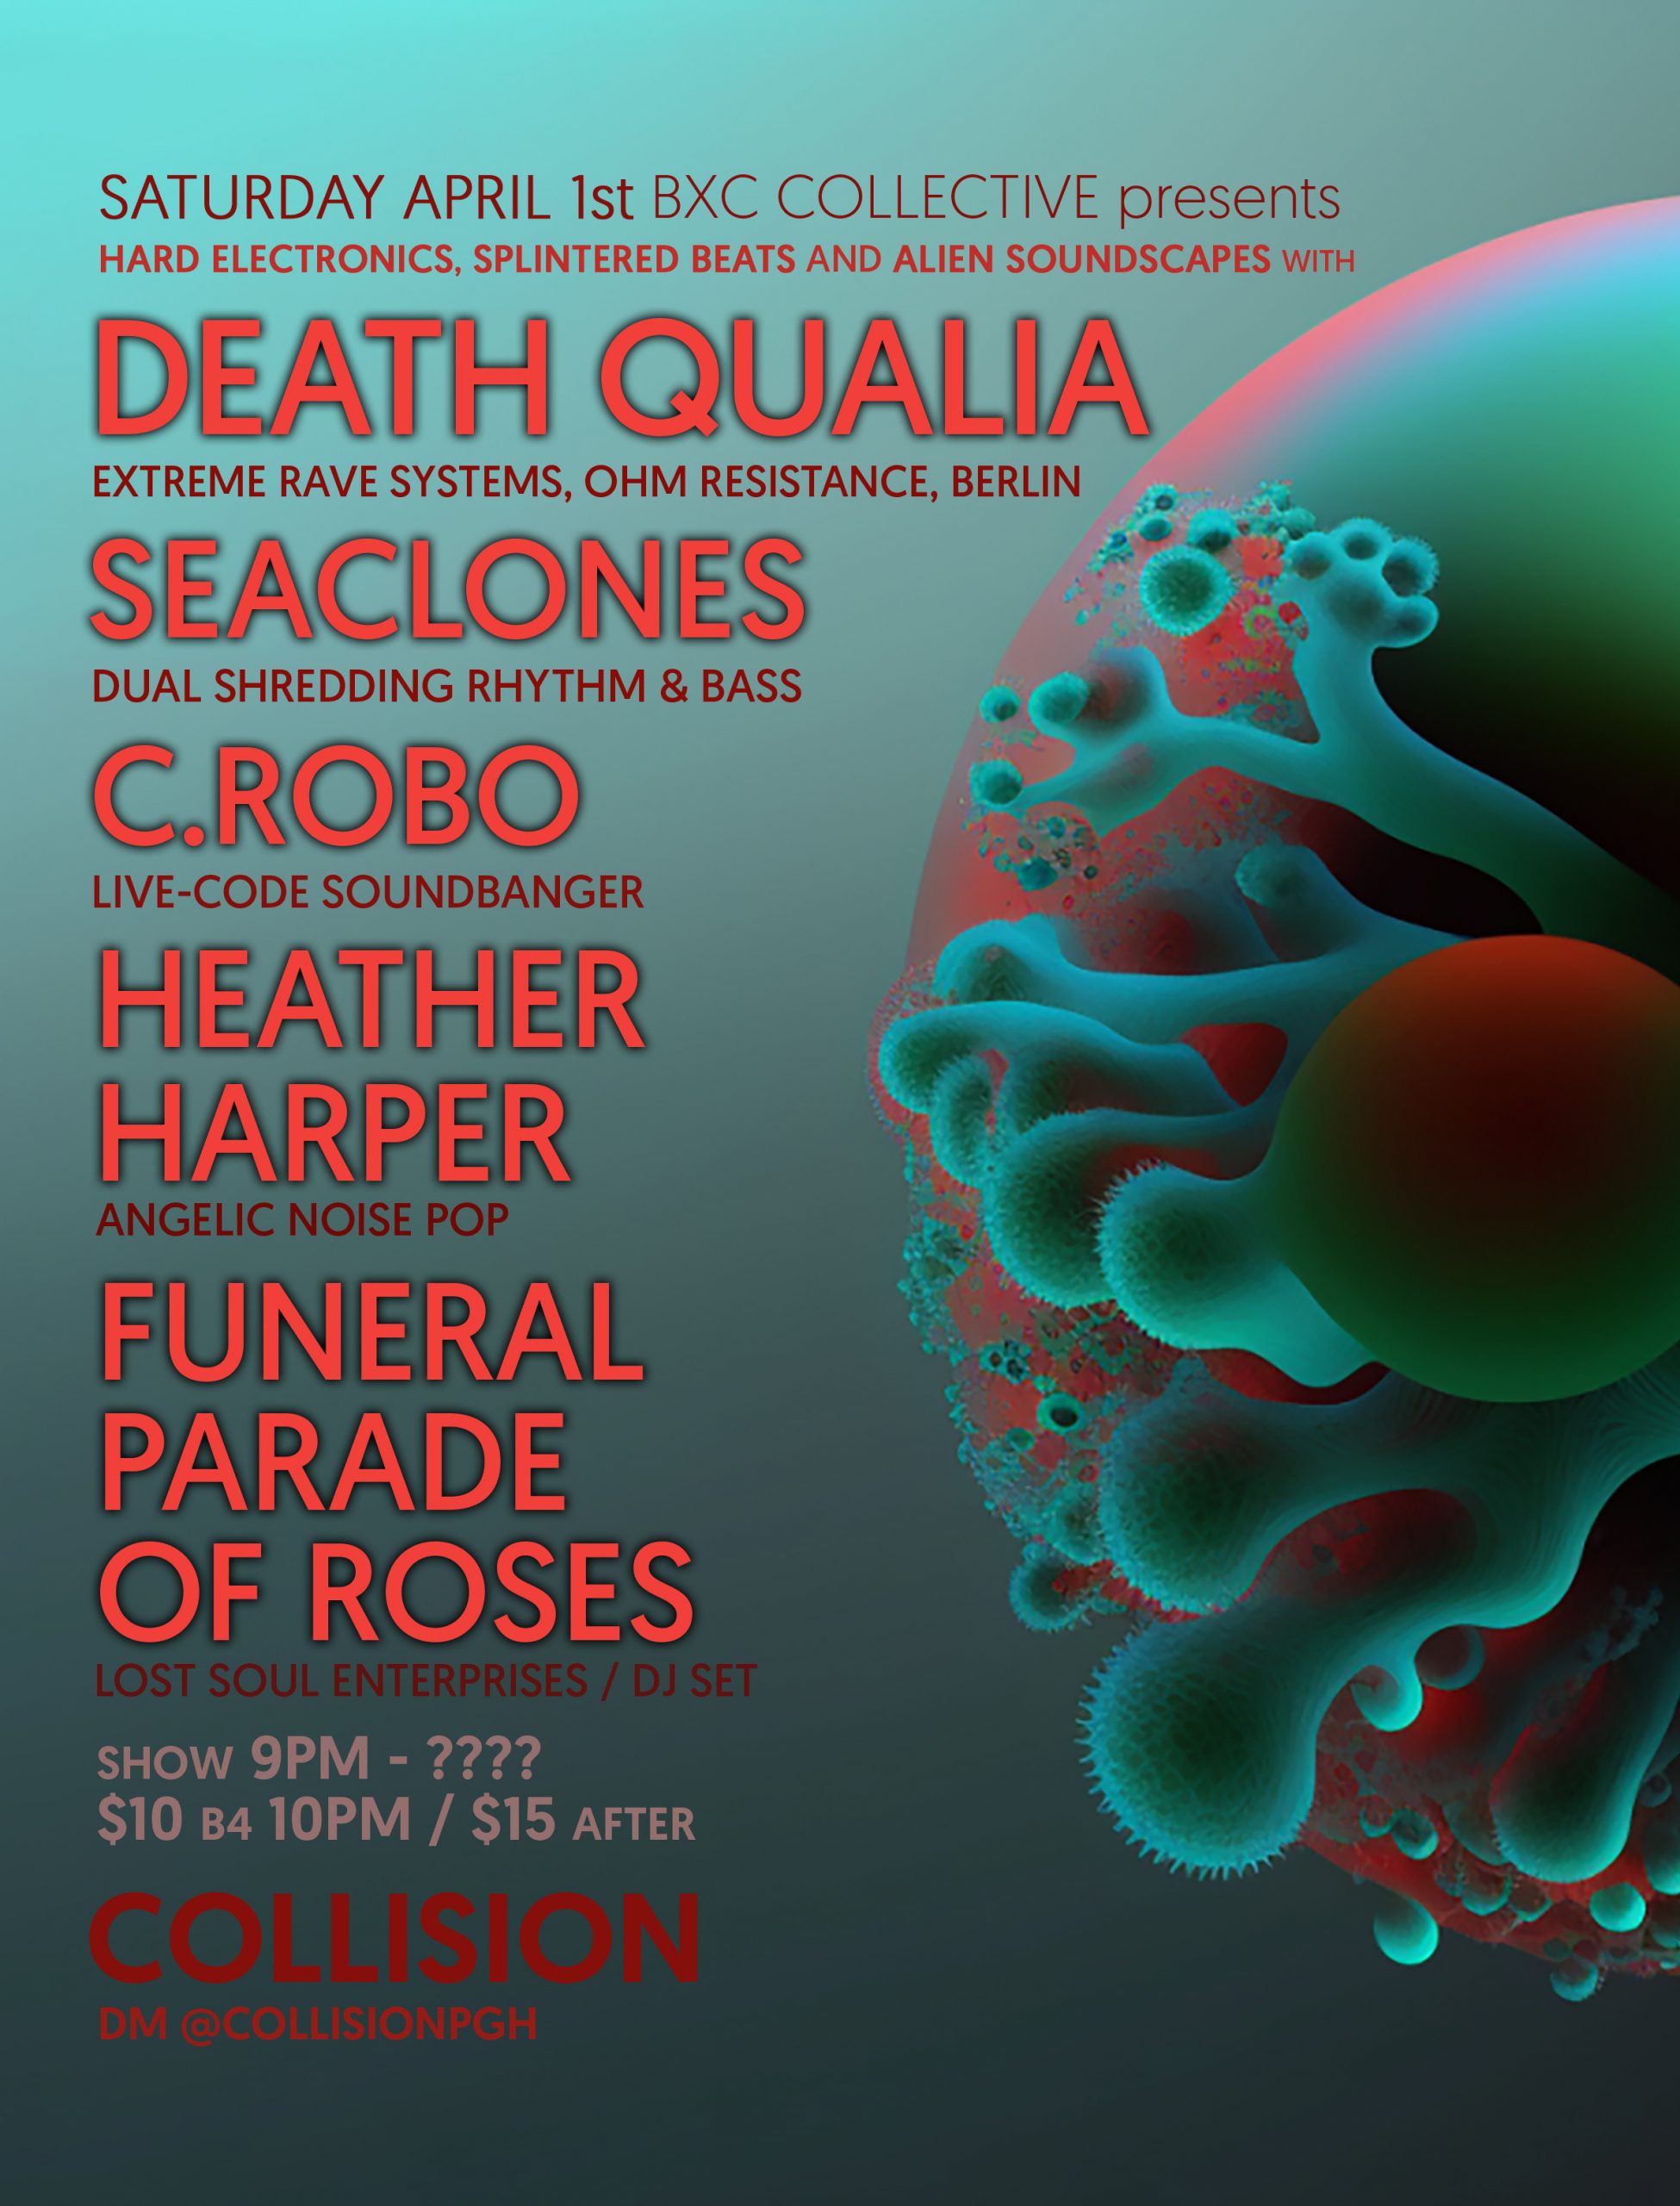 Sat April 1st DEATH QUALIA (Ohm Resistance/Berlin), Seaclones, C. Robo, Heather Harper, Funeral Parade of Roses @ Collision in Pittsburgh